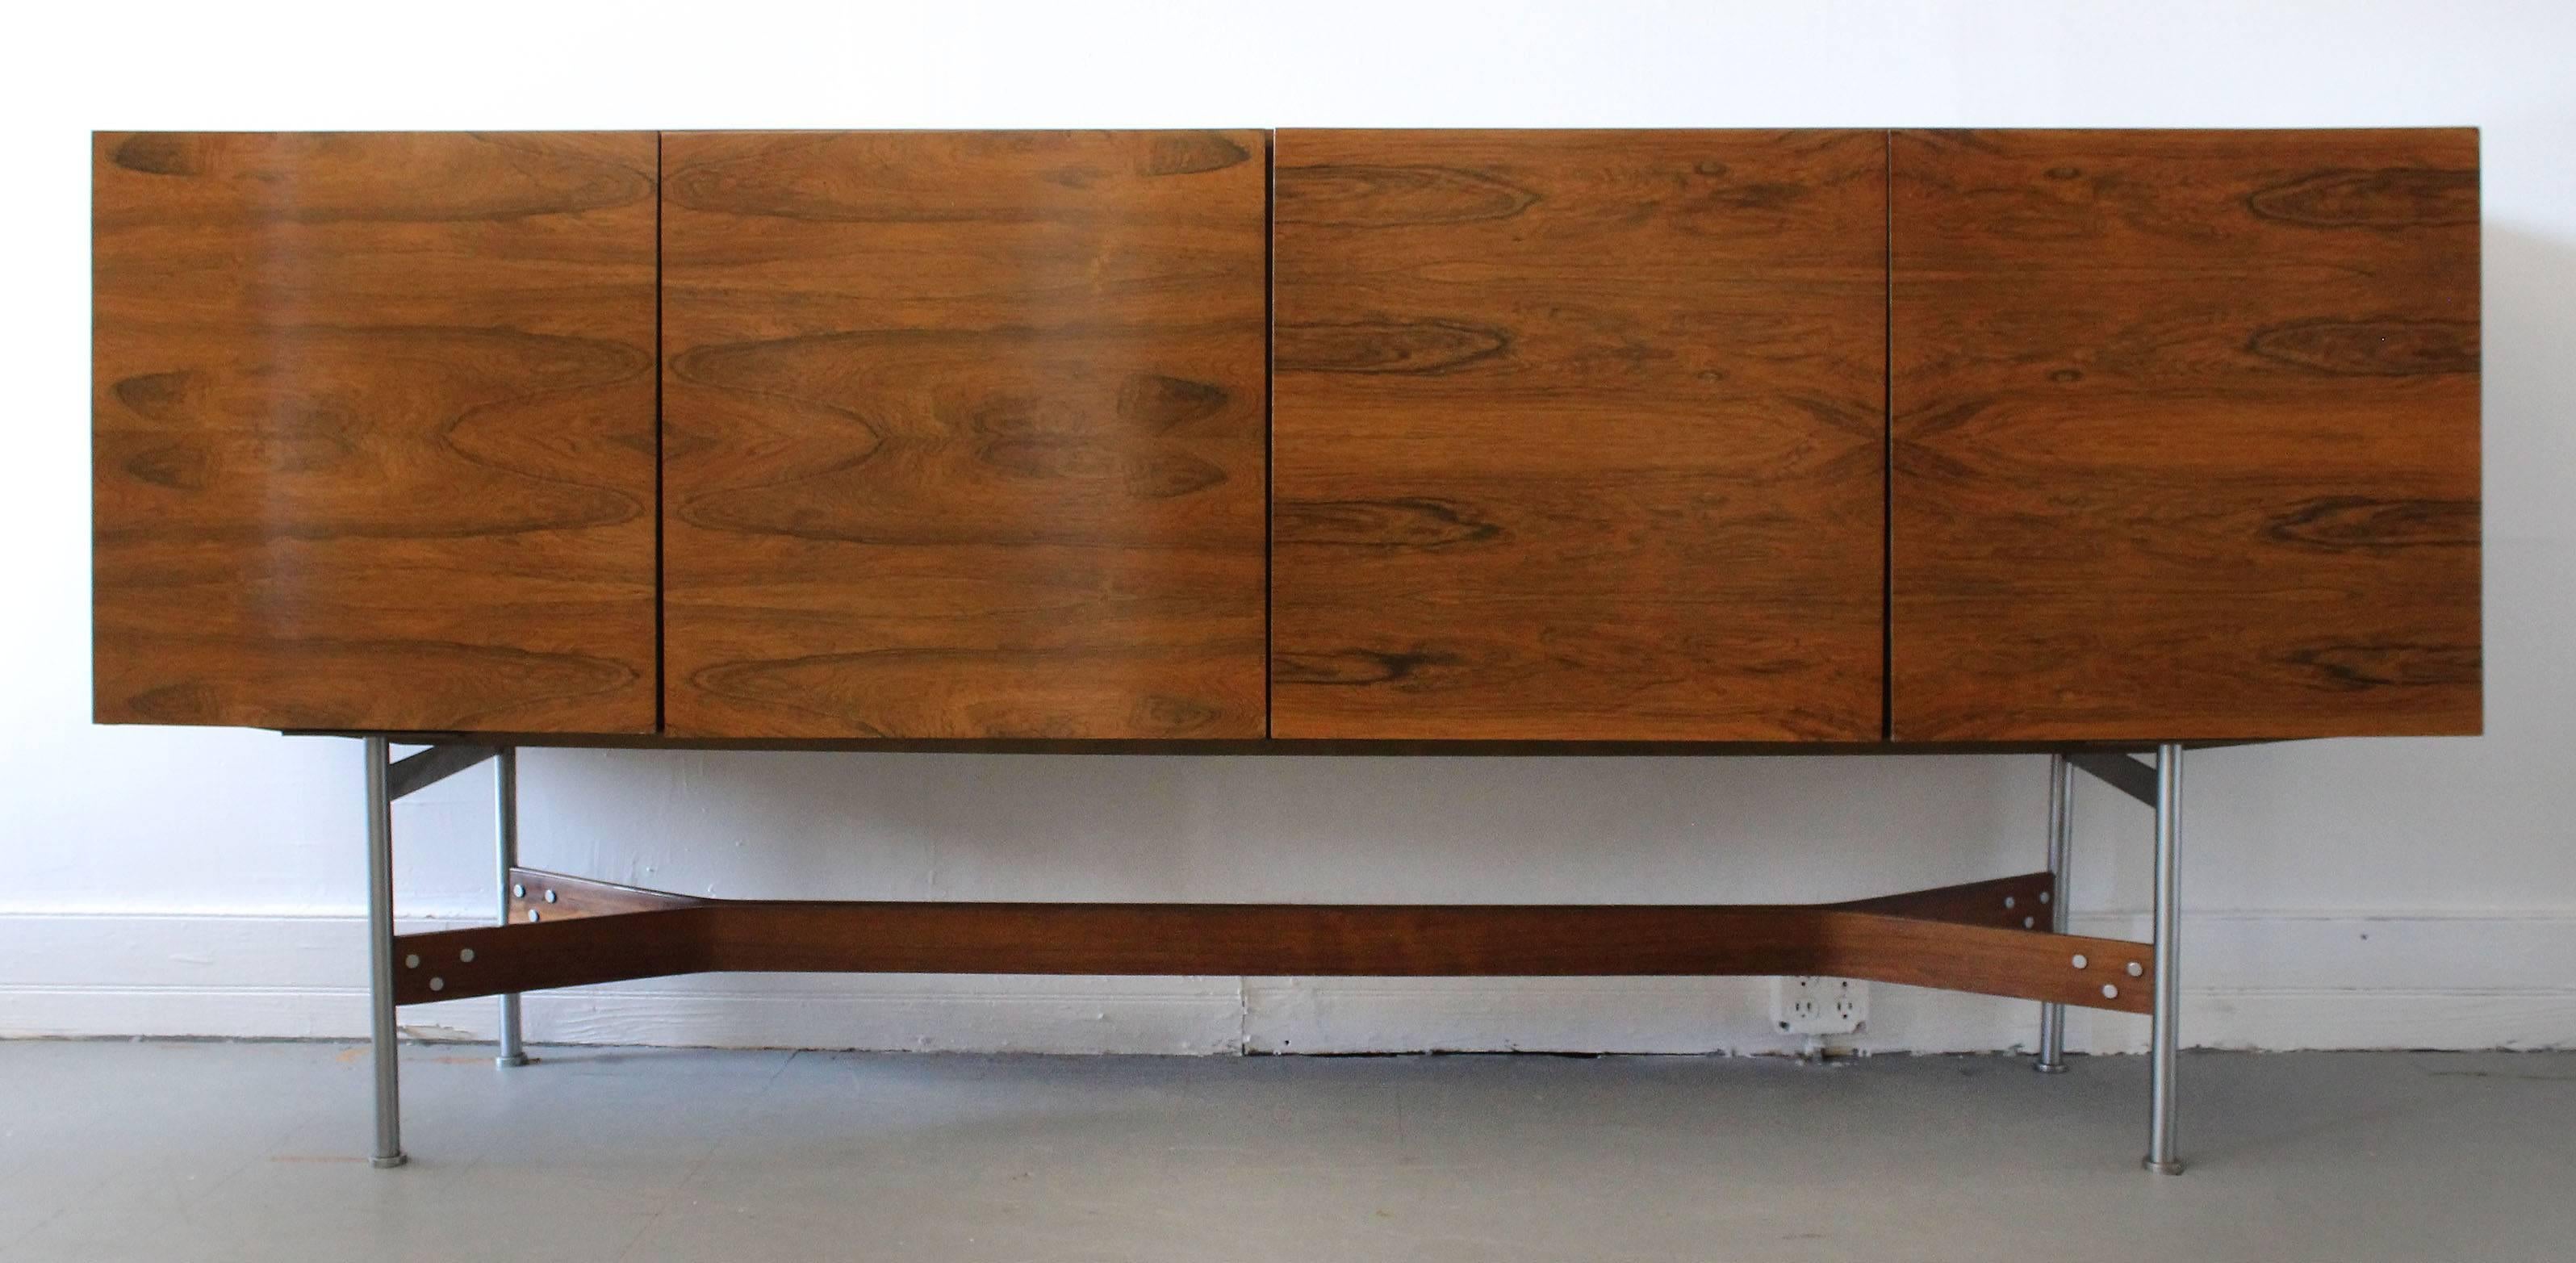 A Mid-Century rosewood sideboard, designed by Rudolf Bernd Glatzel for Fristho Franeker, featuring clean lines and bookmatched cabinet doors, on steel frame.